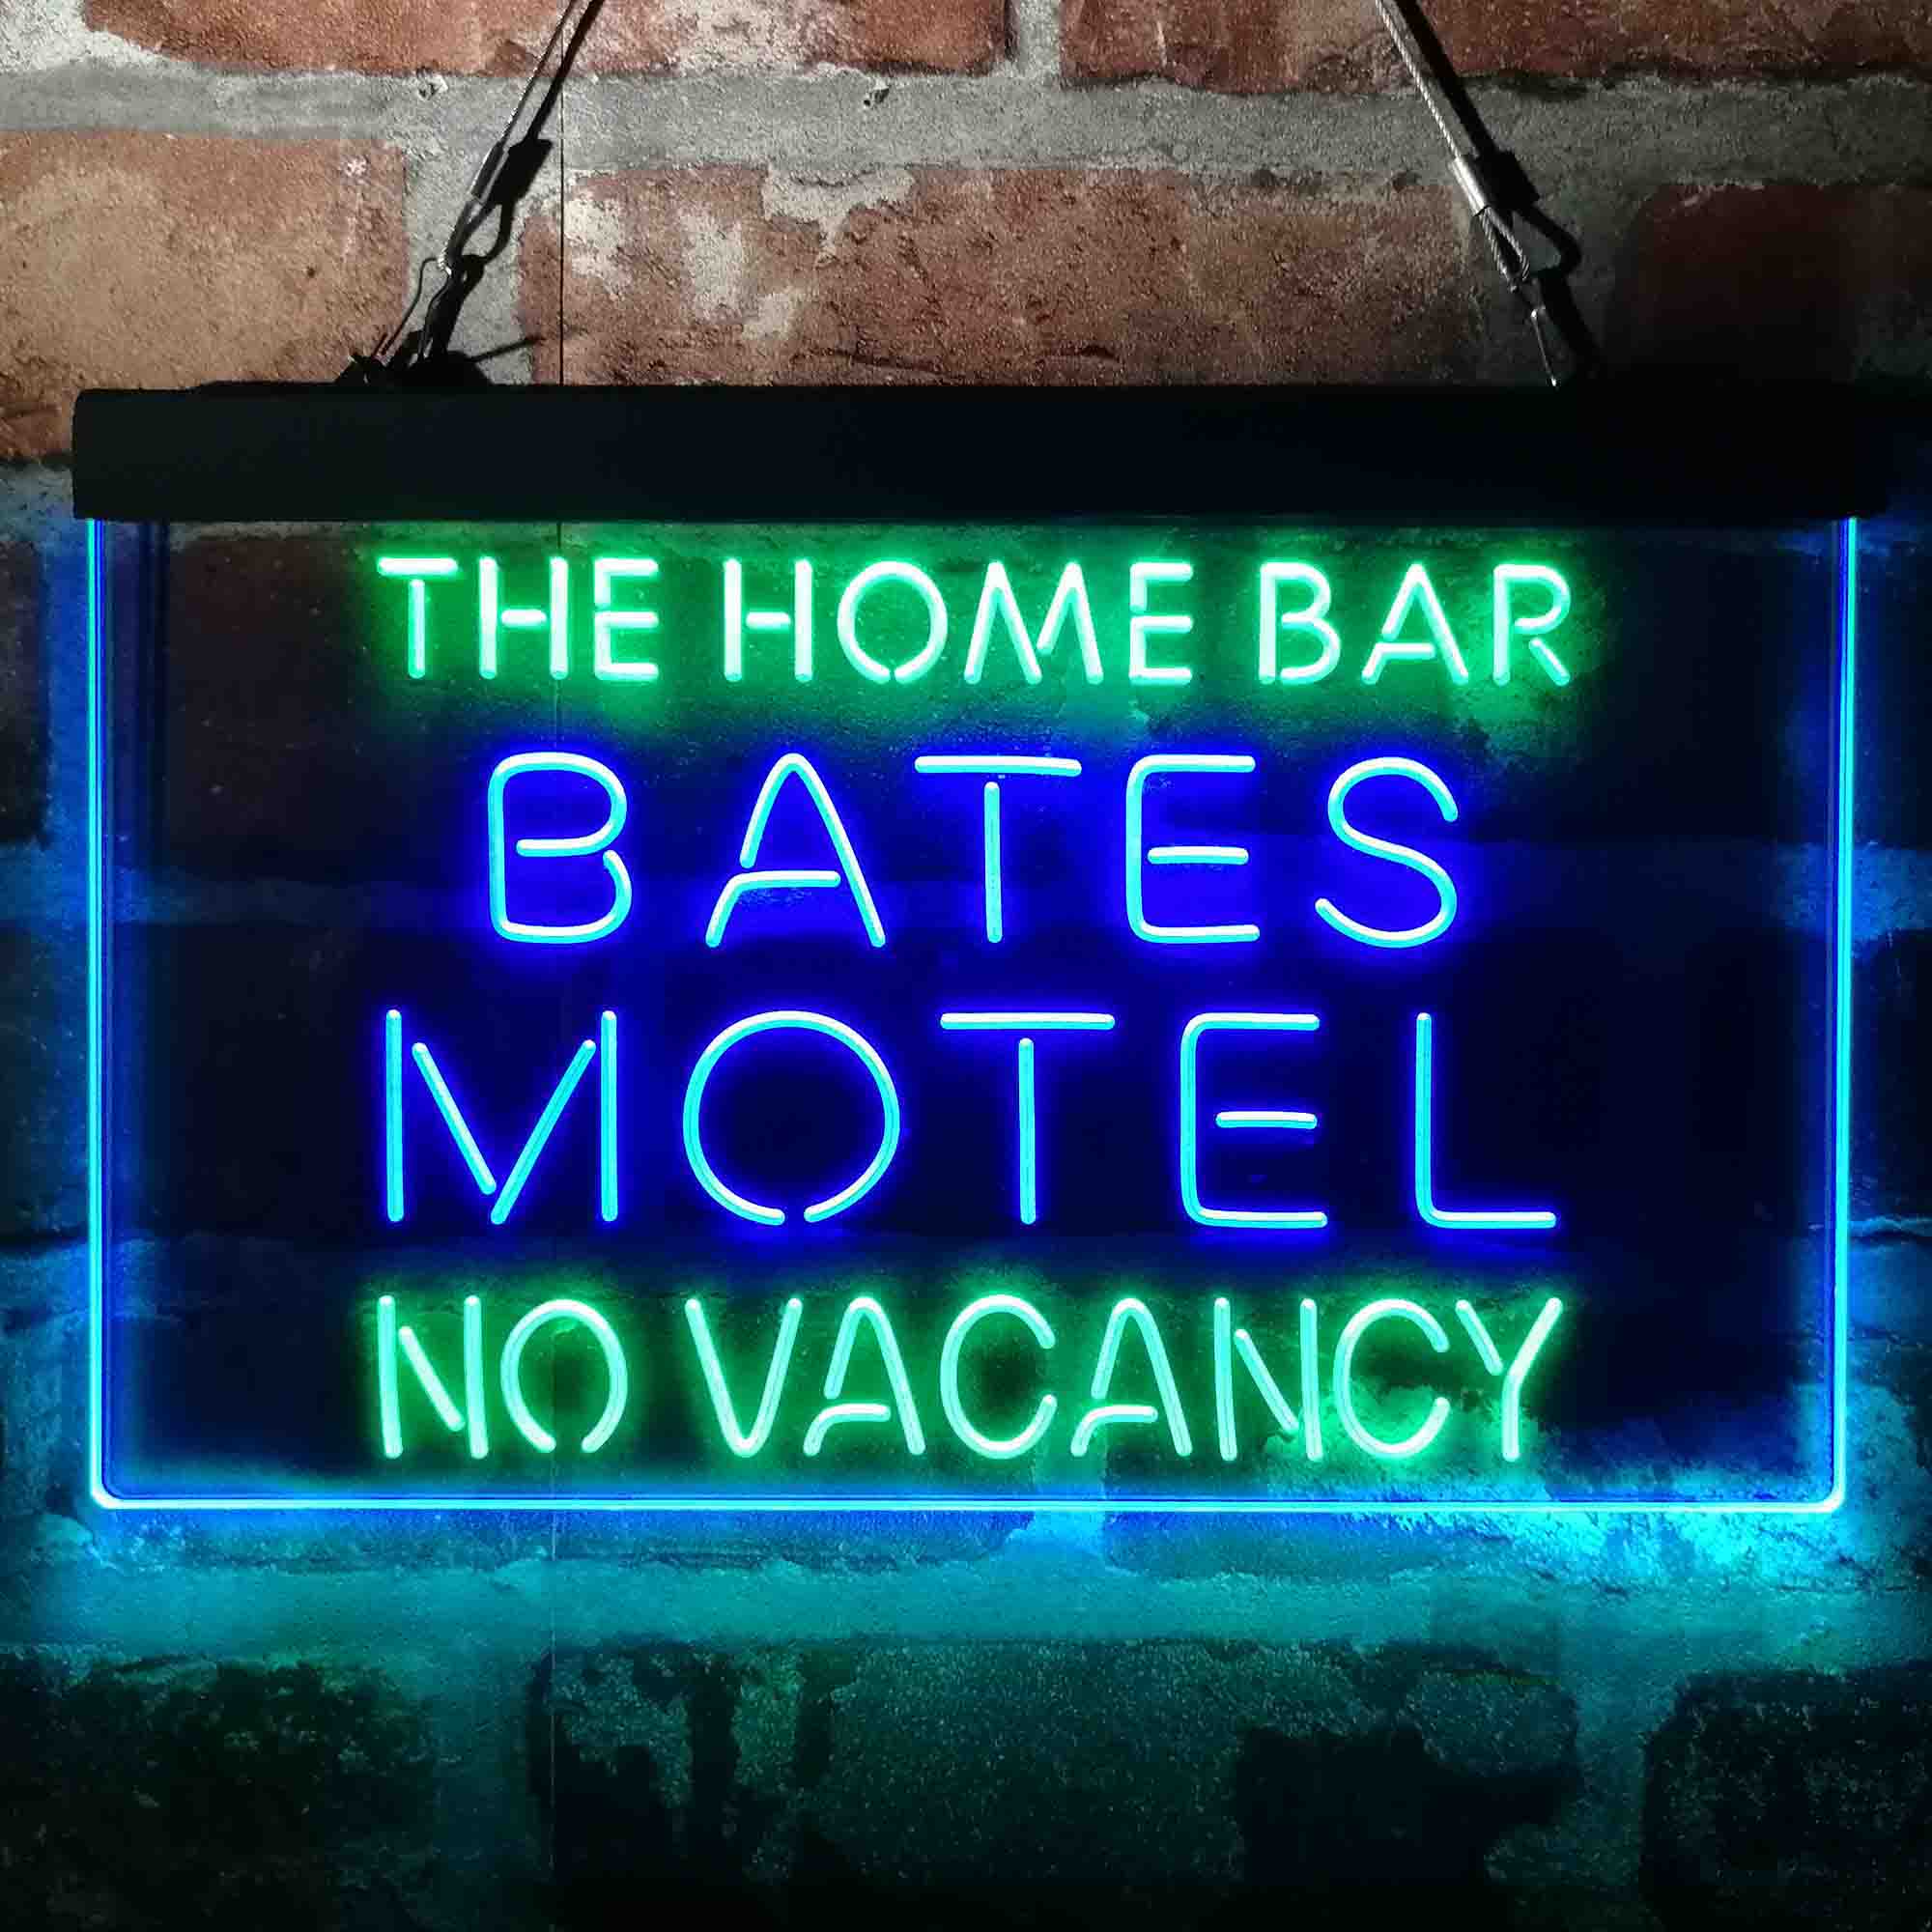 Personalized Bates Motel No Vacancy Neon LED Sign